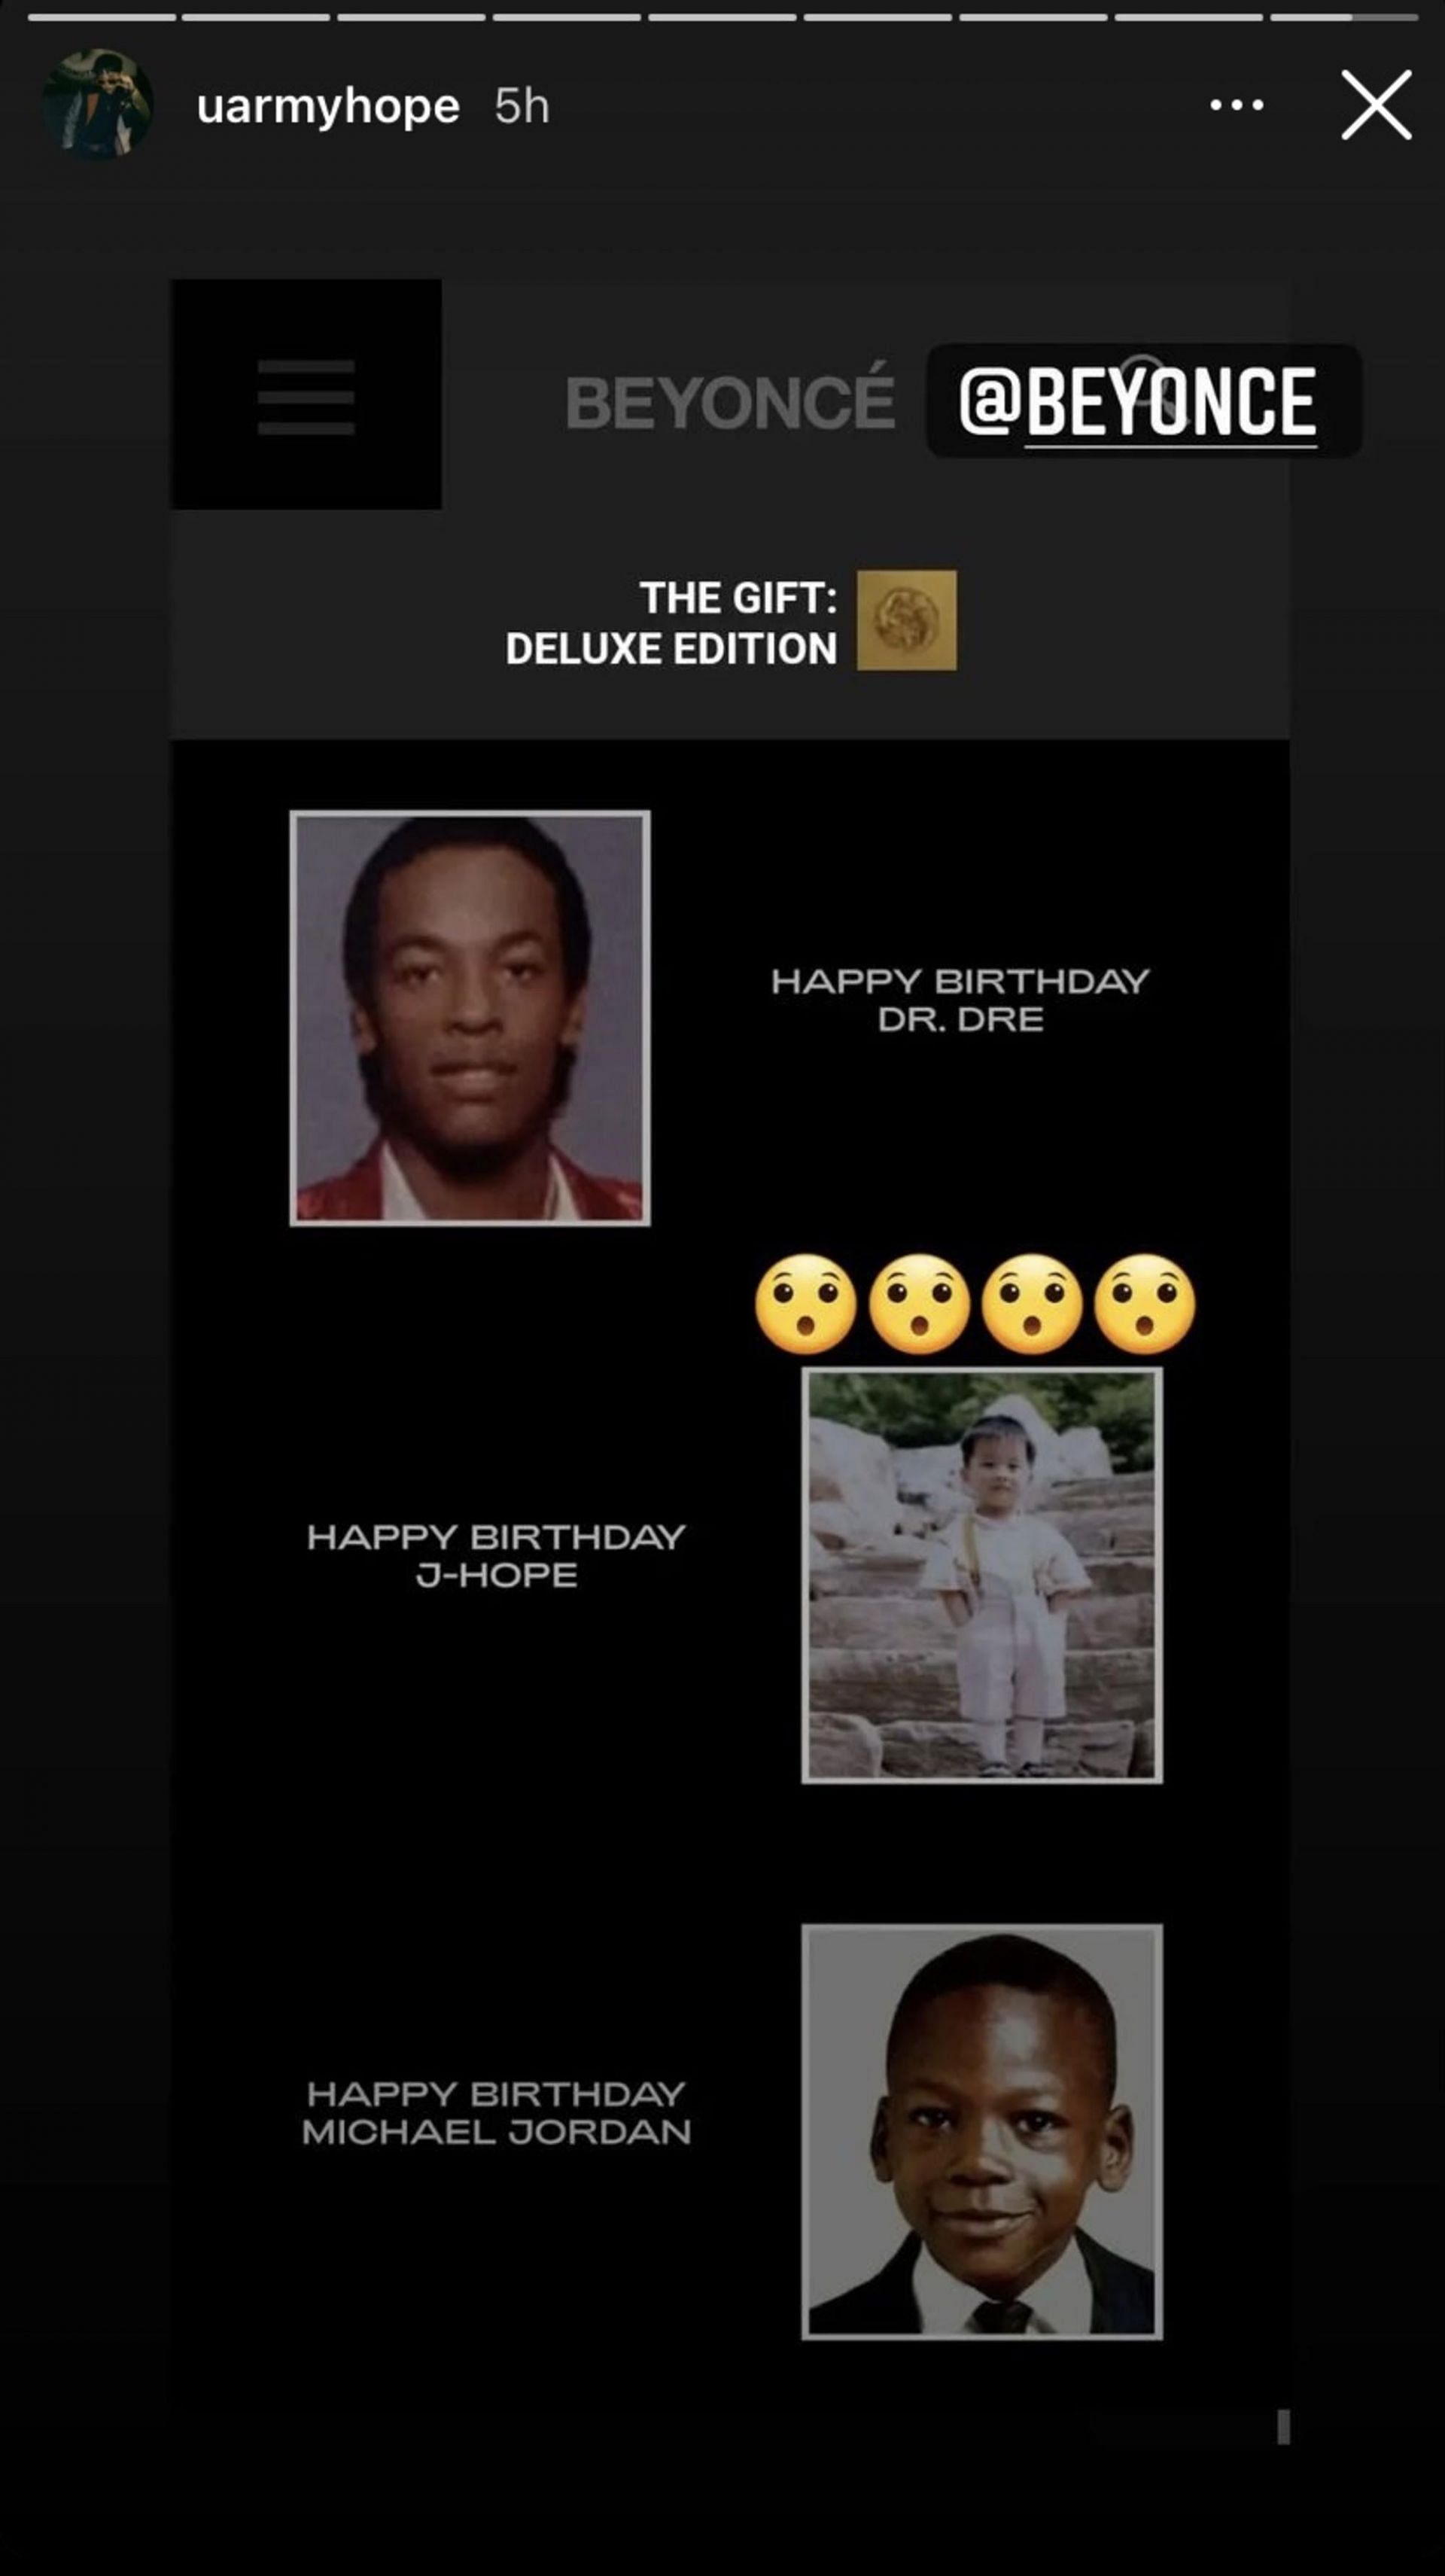 J-Hope post&rsquo;s Beyonc&eacute;&rsquo;s birthday wish on his Instagram story (Image via Instagram/@uarmyhope)